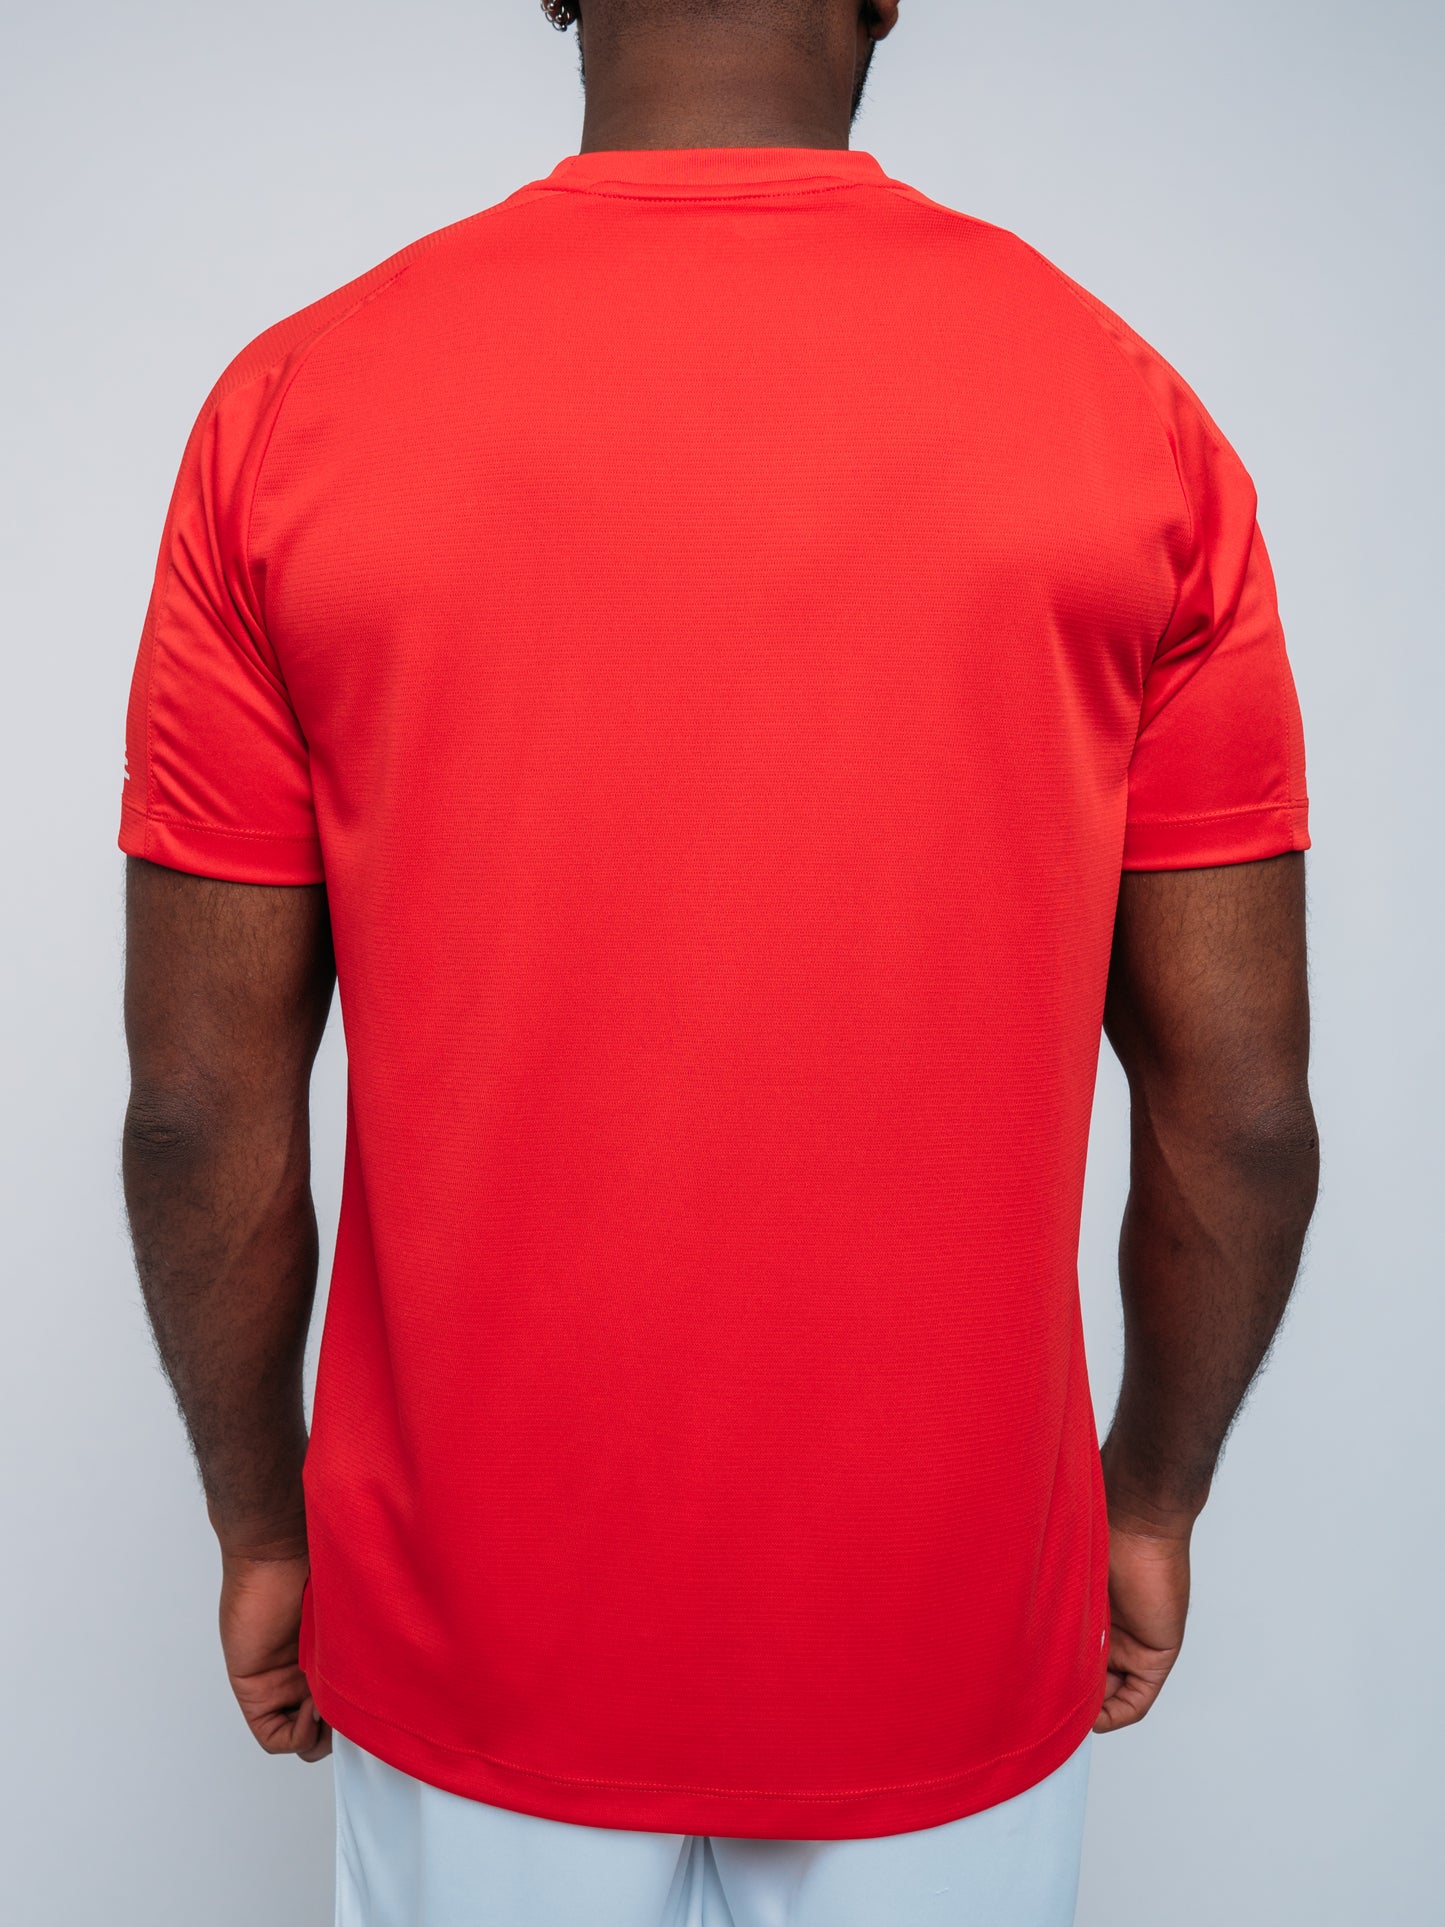 Red Home Shirt 2021/23 - Adults